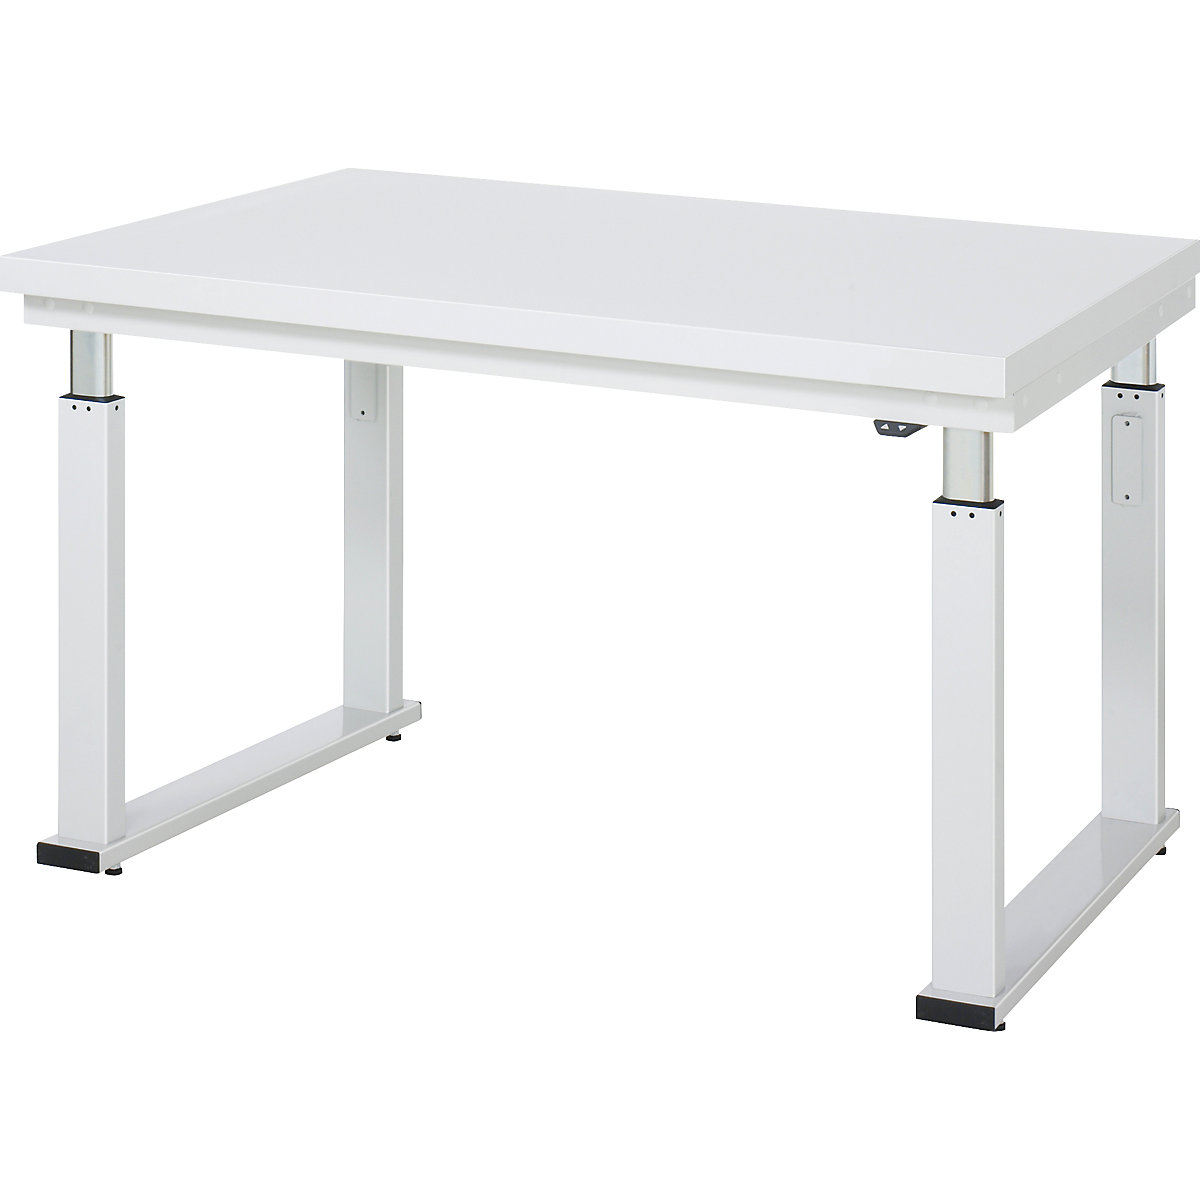 Work table, electric height adjustment – RAU, hardened laminate worktop, max. load 600 kg, WxD 1250 x 900 mm-7